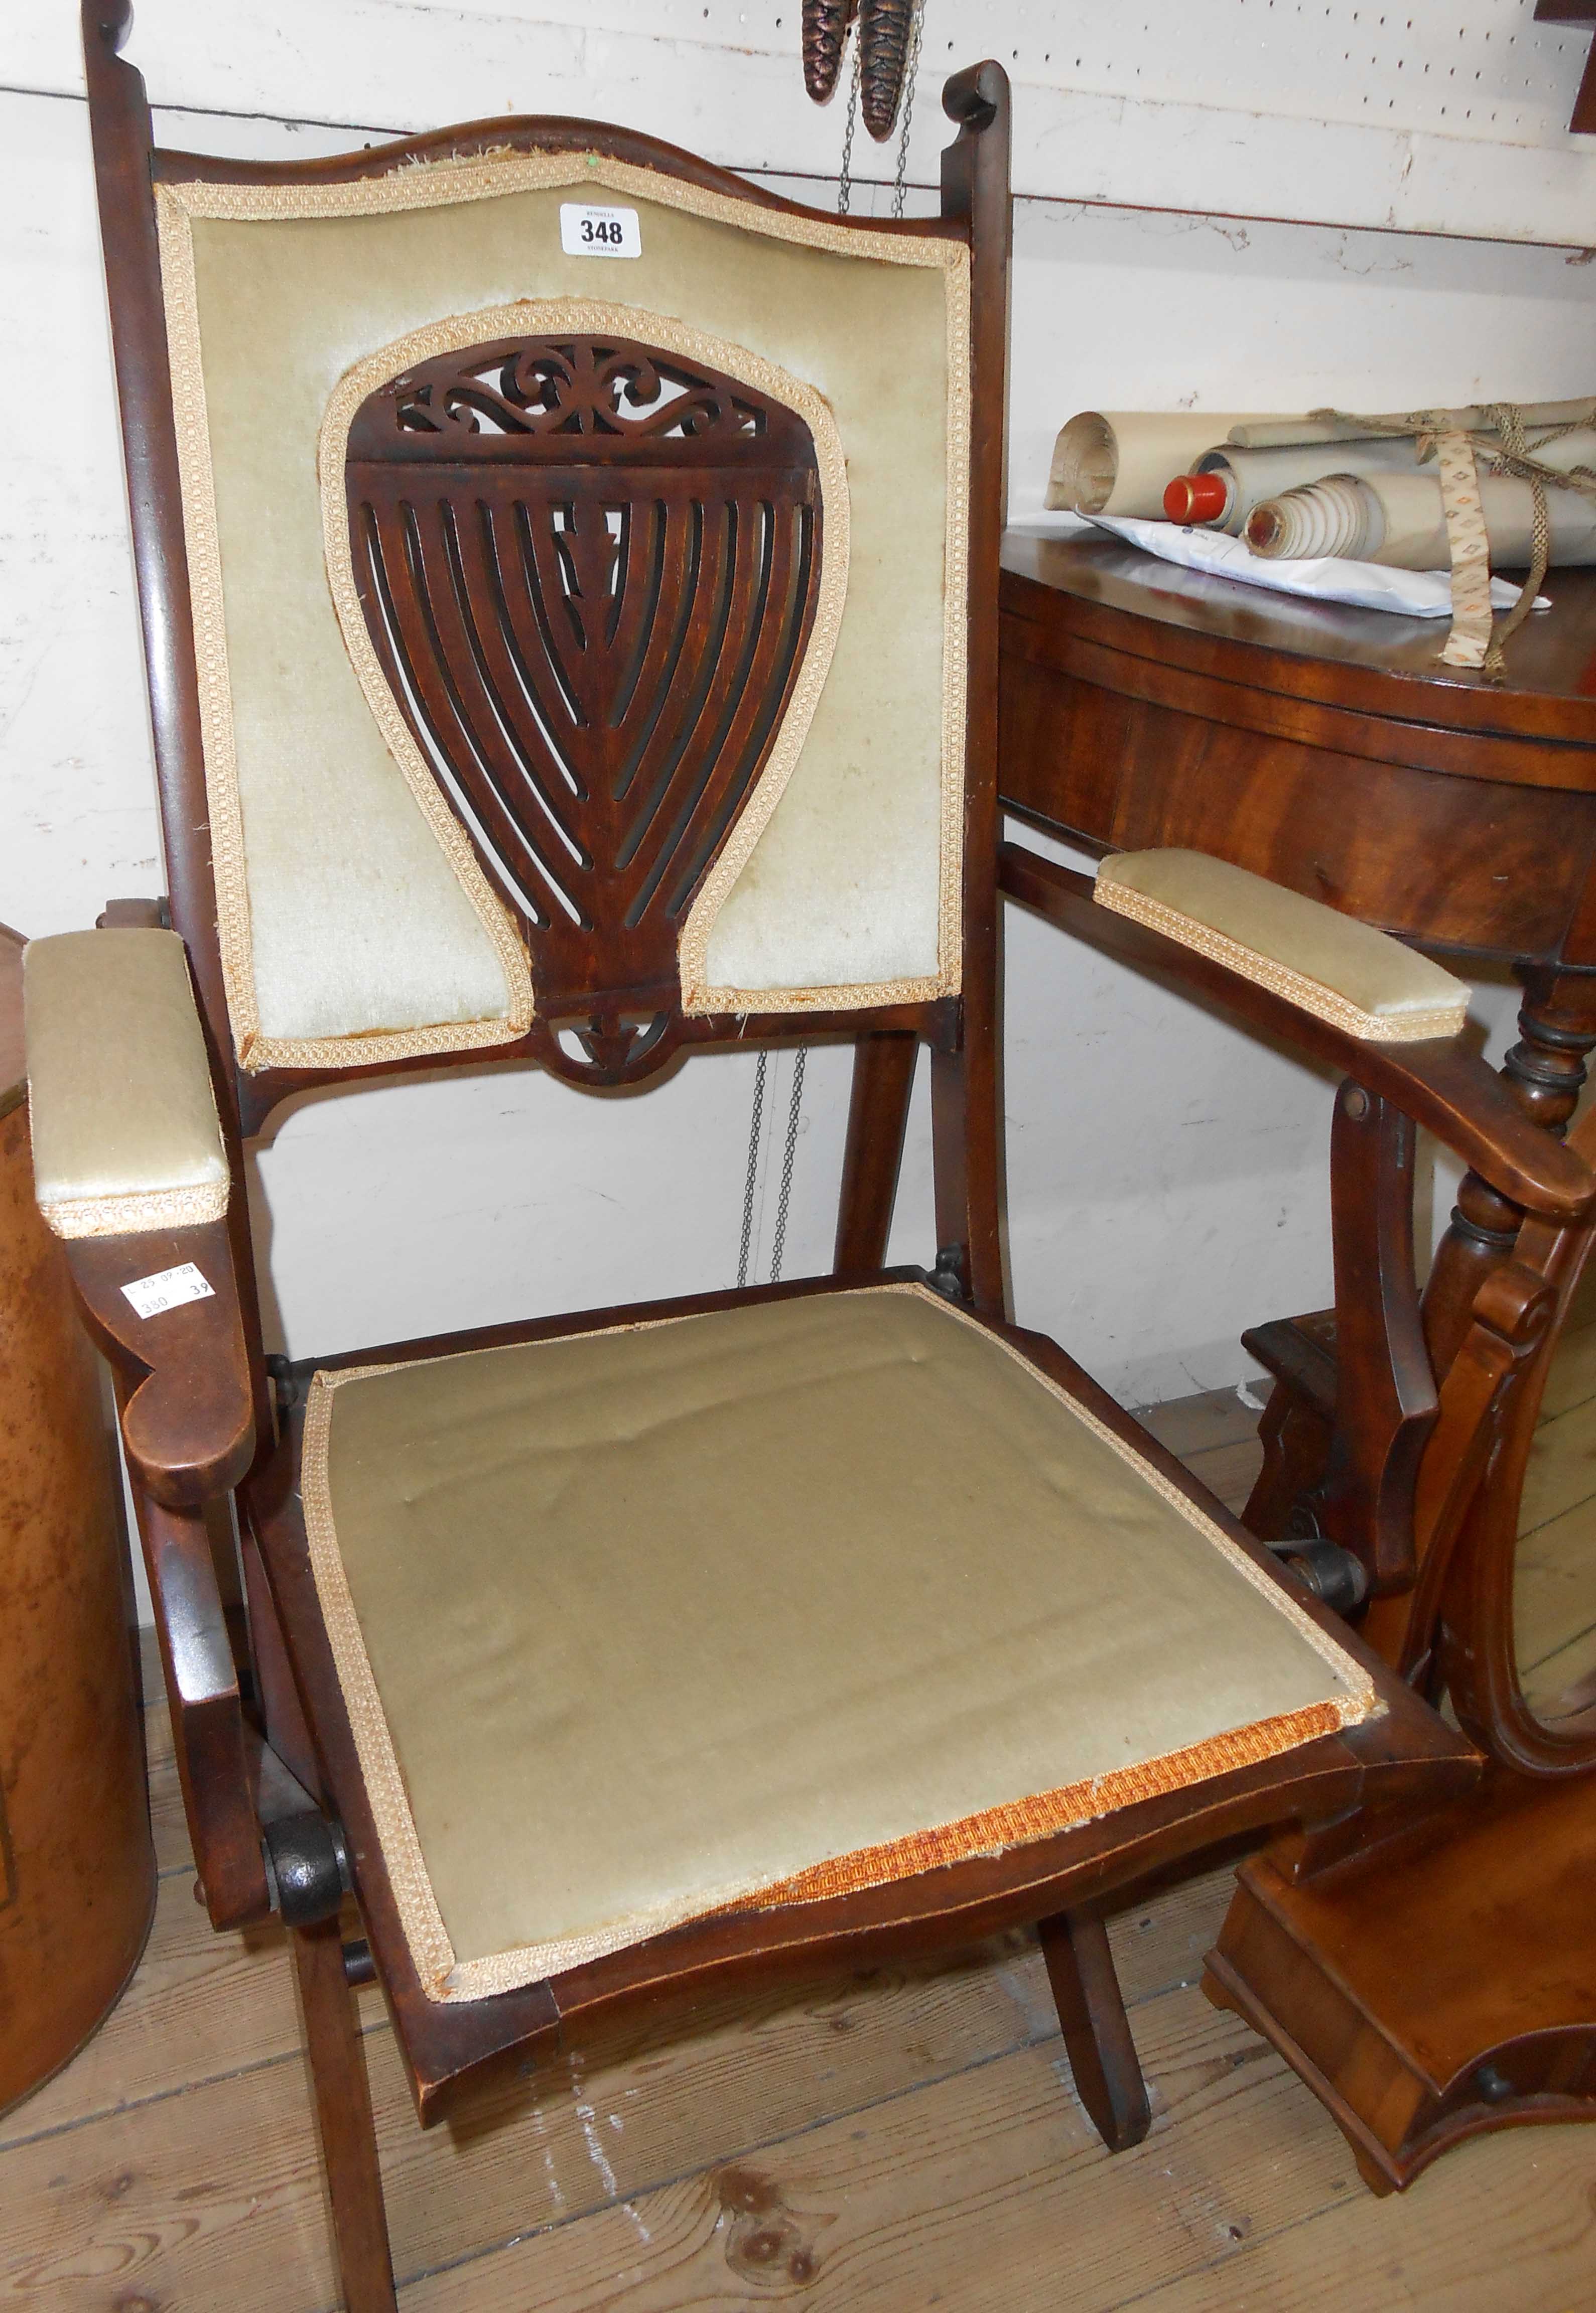 An Edwardian walnut framed campaign style folding chair with ornate pierced splat back and